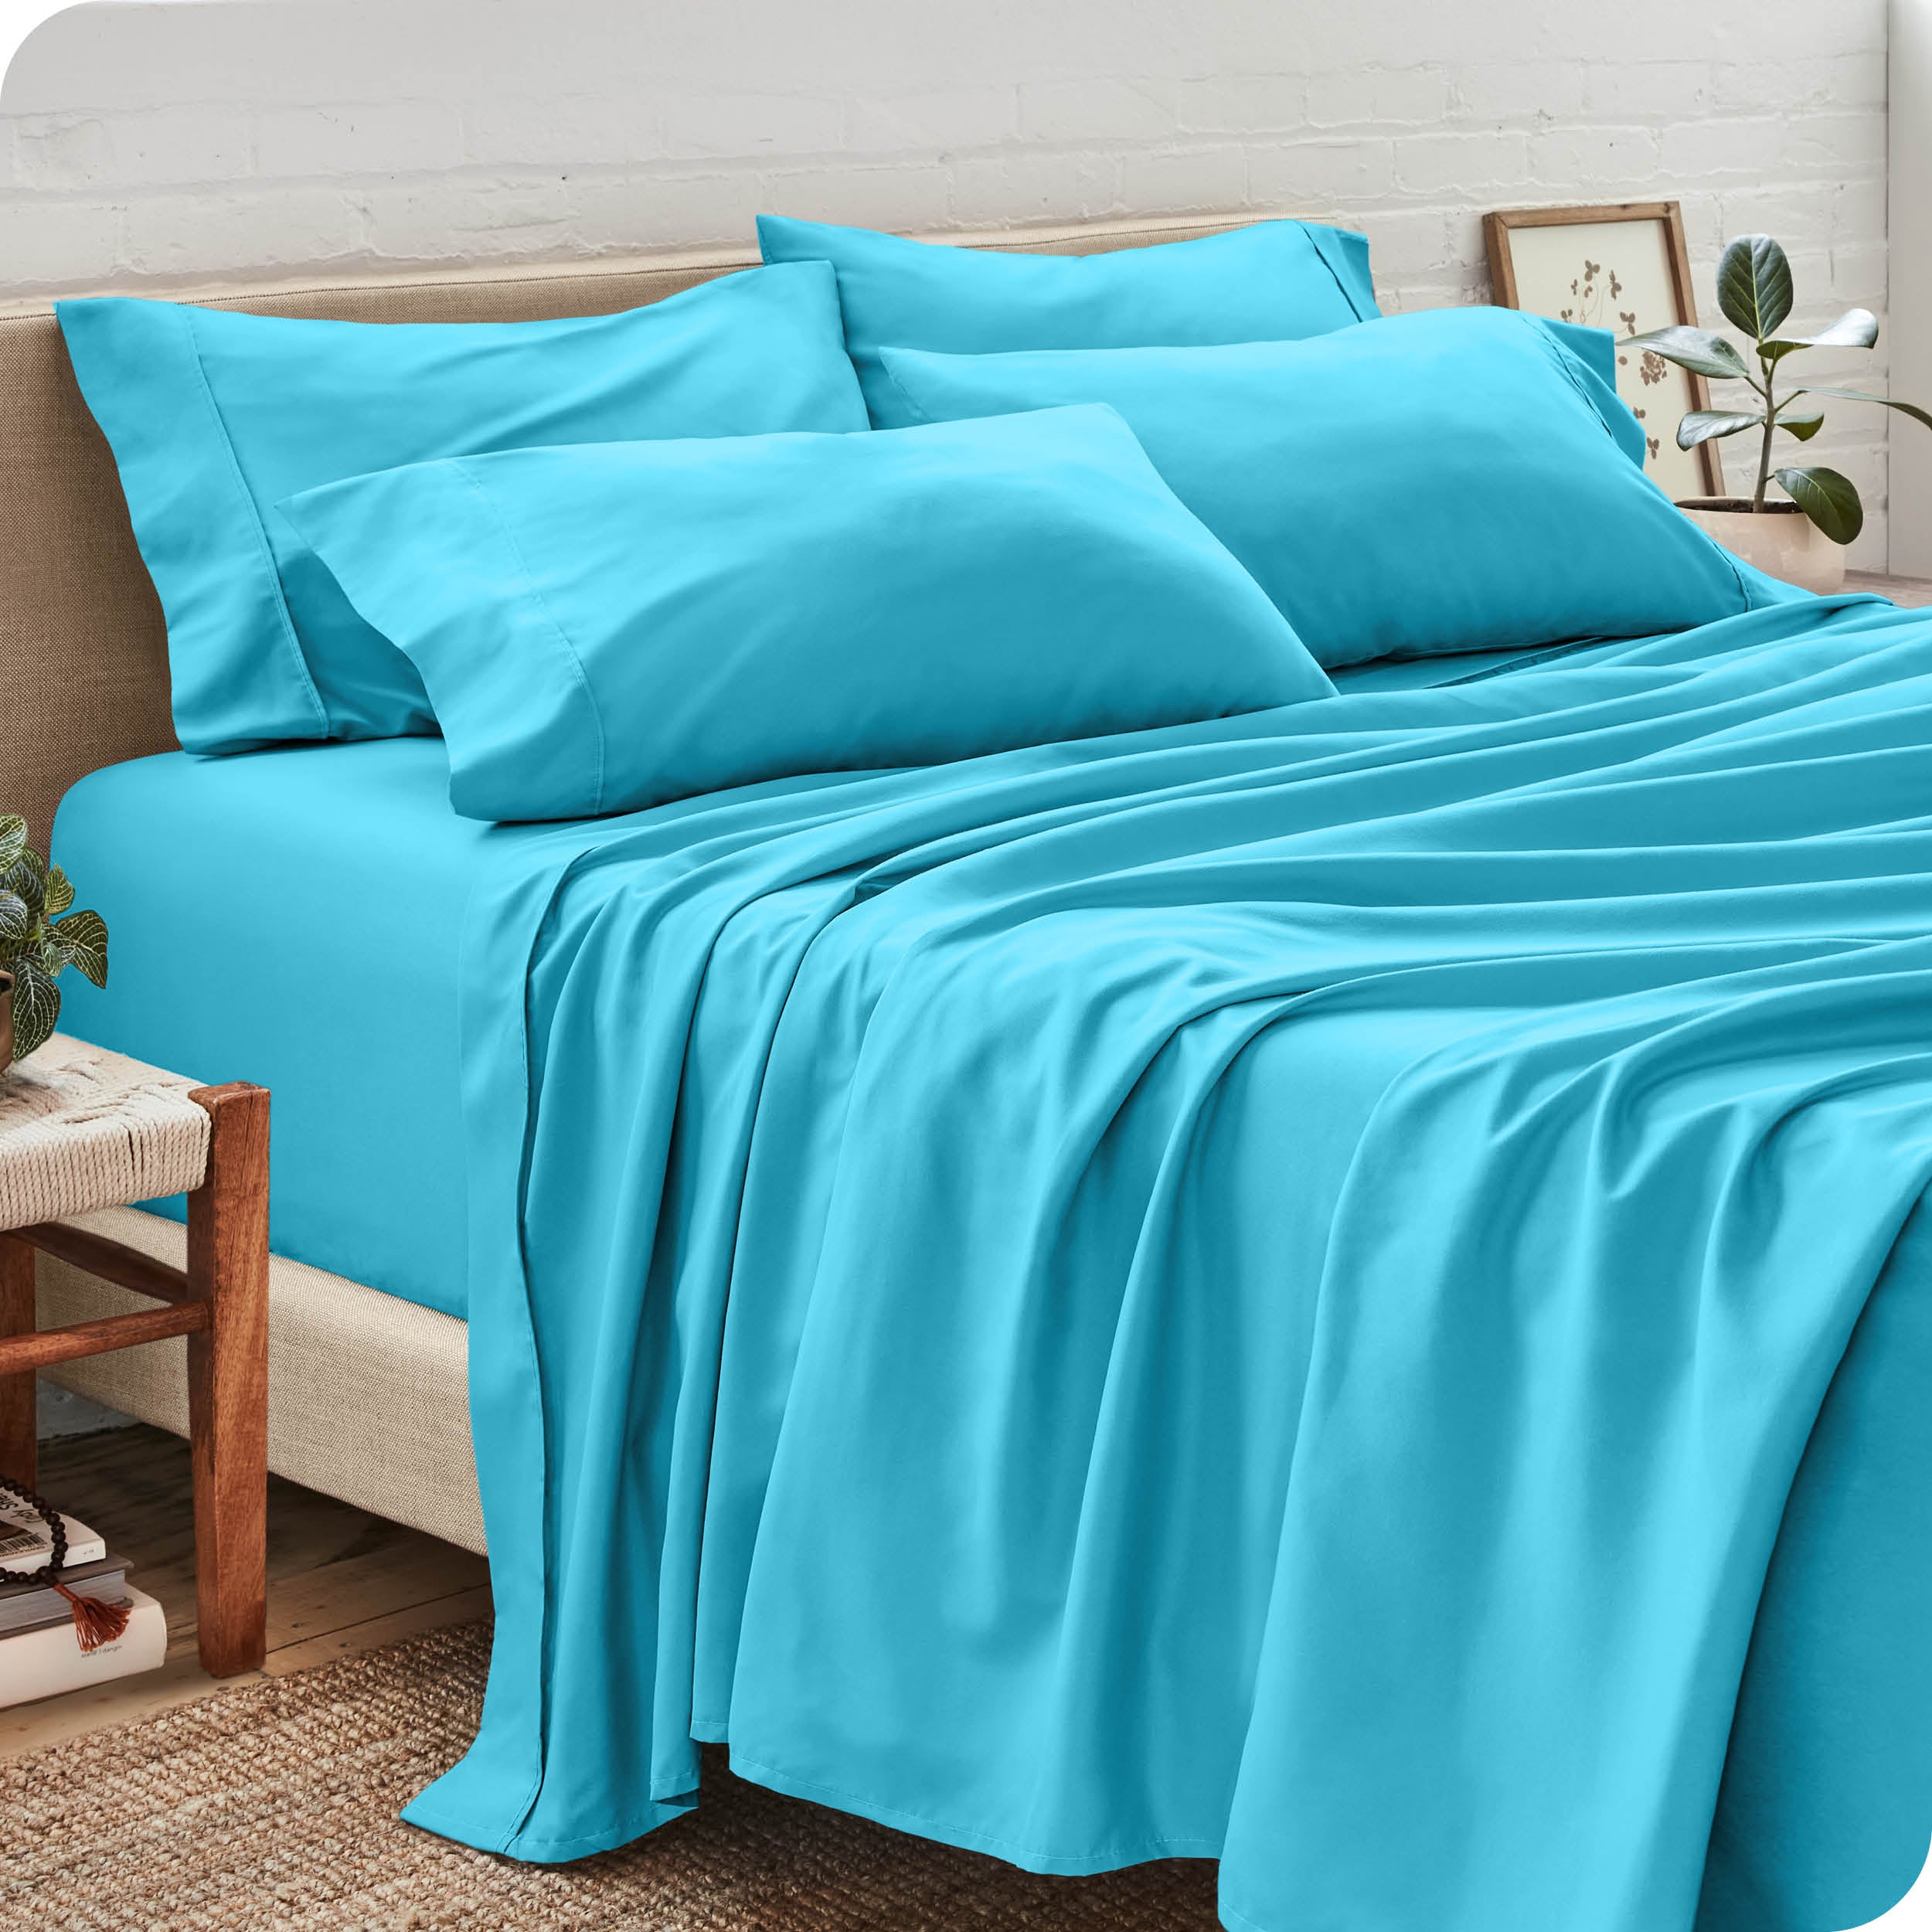 Microfiber Sheet Set with Extra Pillowcases